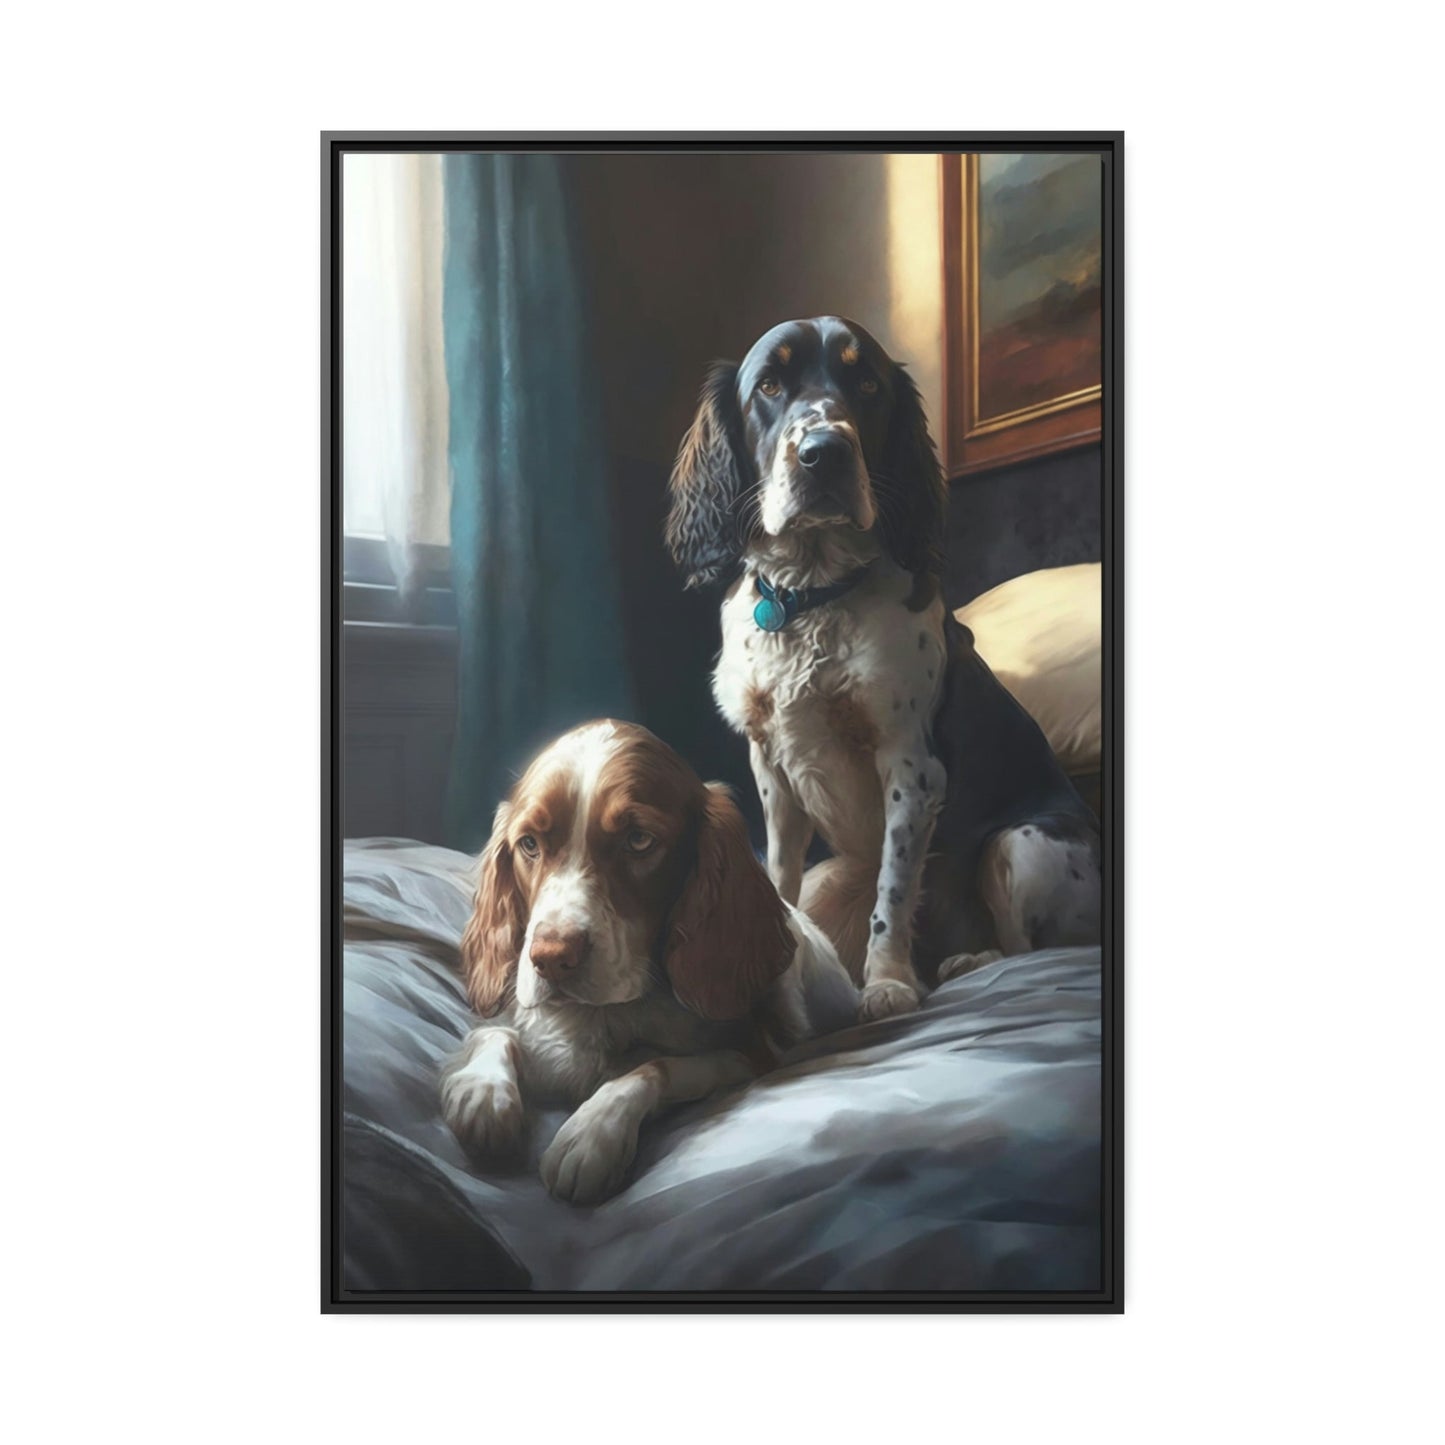 A Dog's Best Friend: Loyalty on Canvas